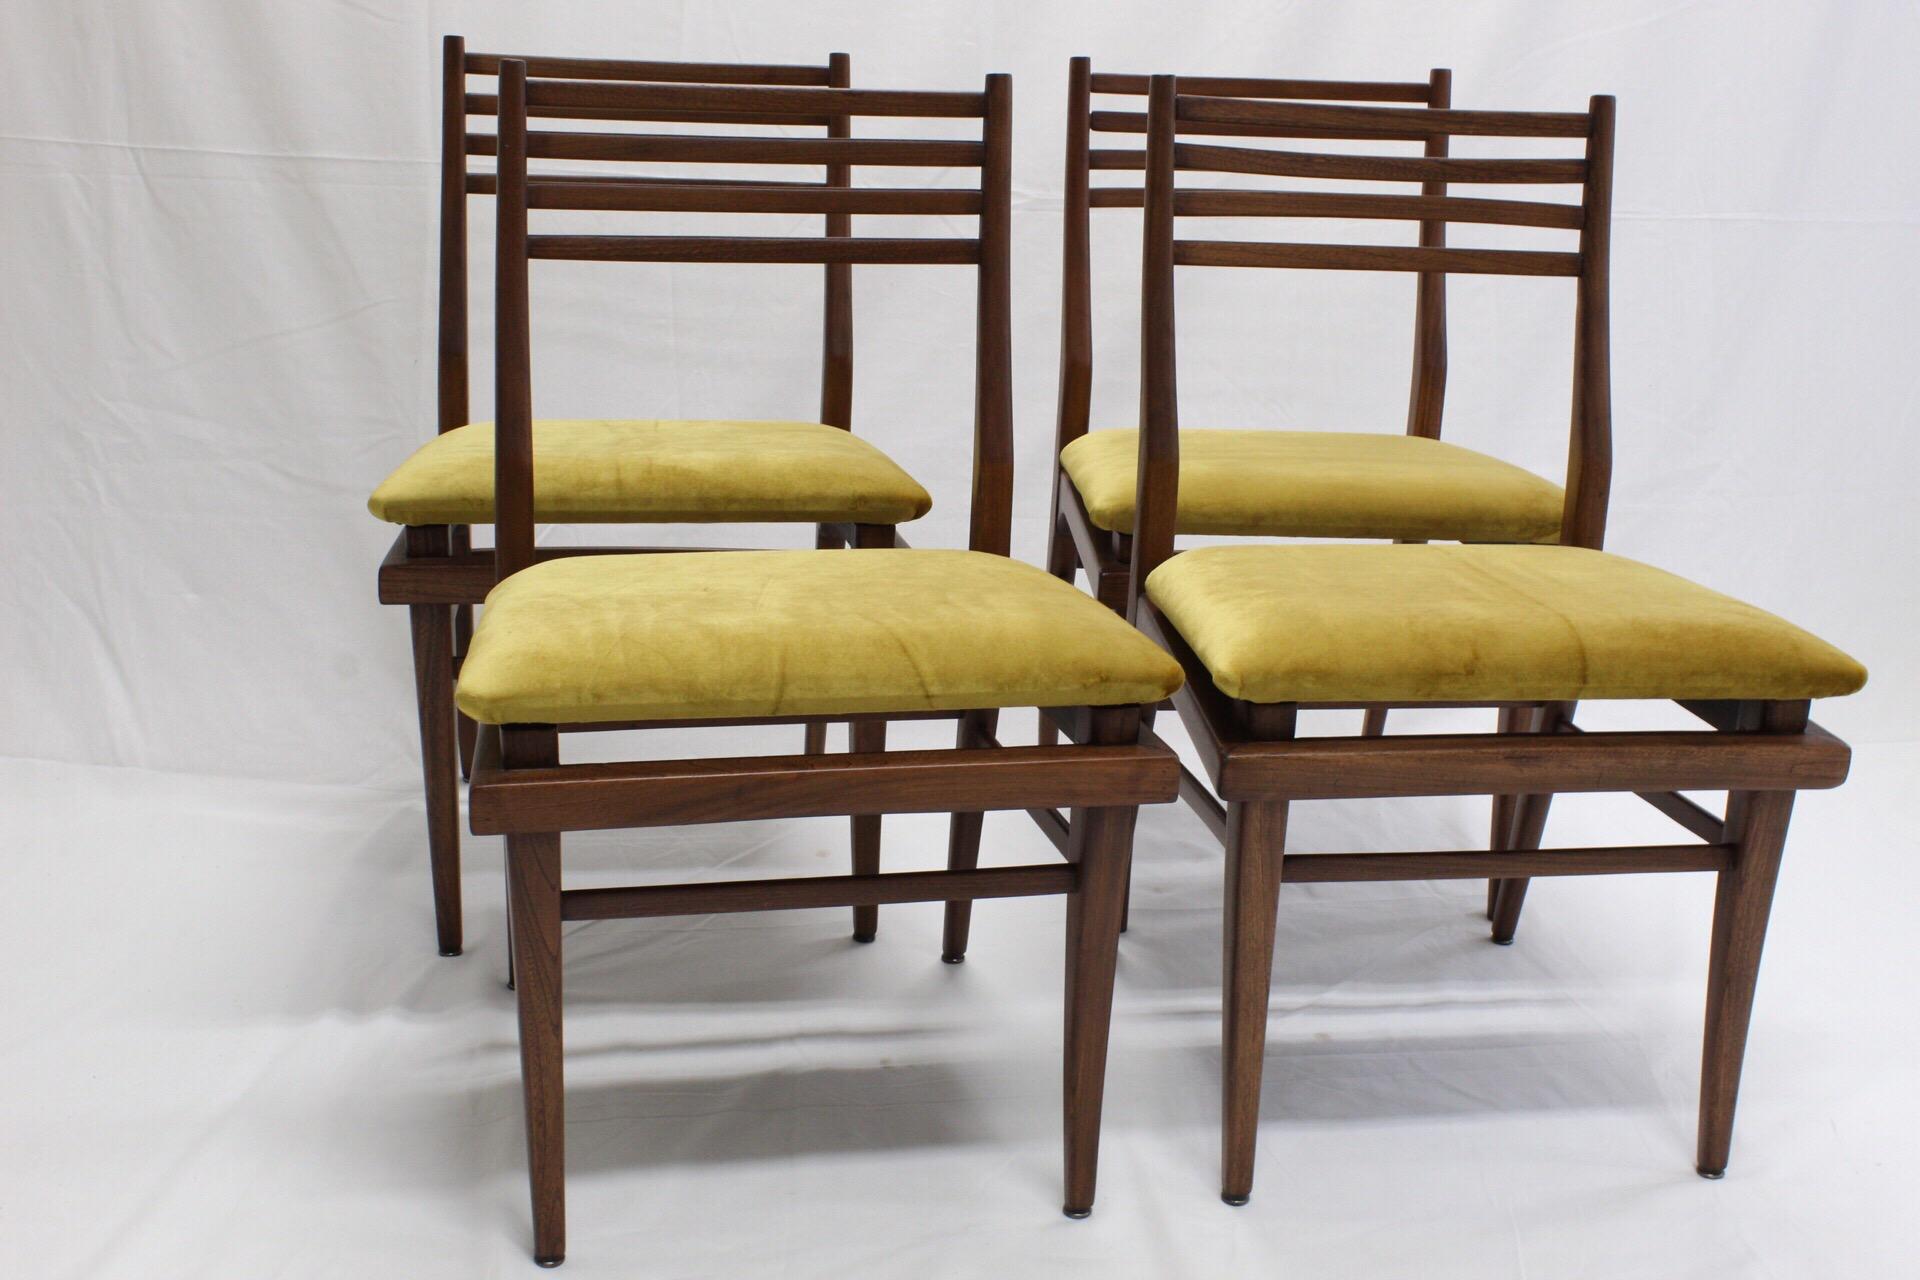 We present you this set of four chairs of the extinct furniture factory 